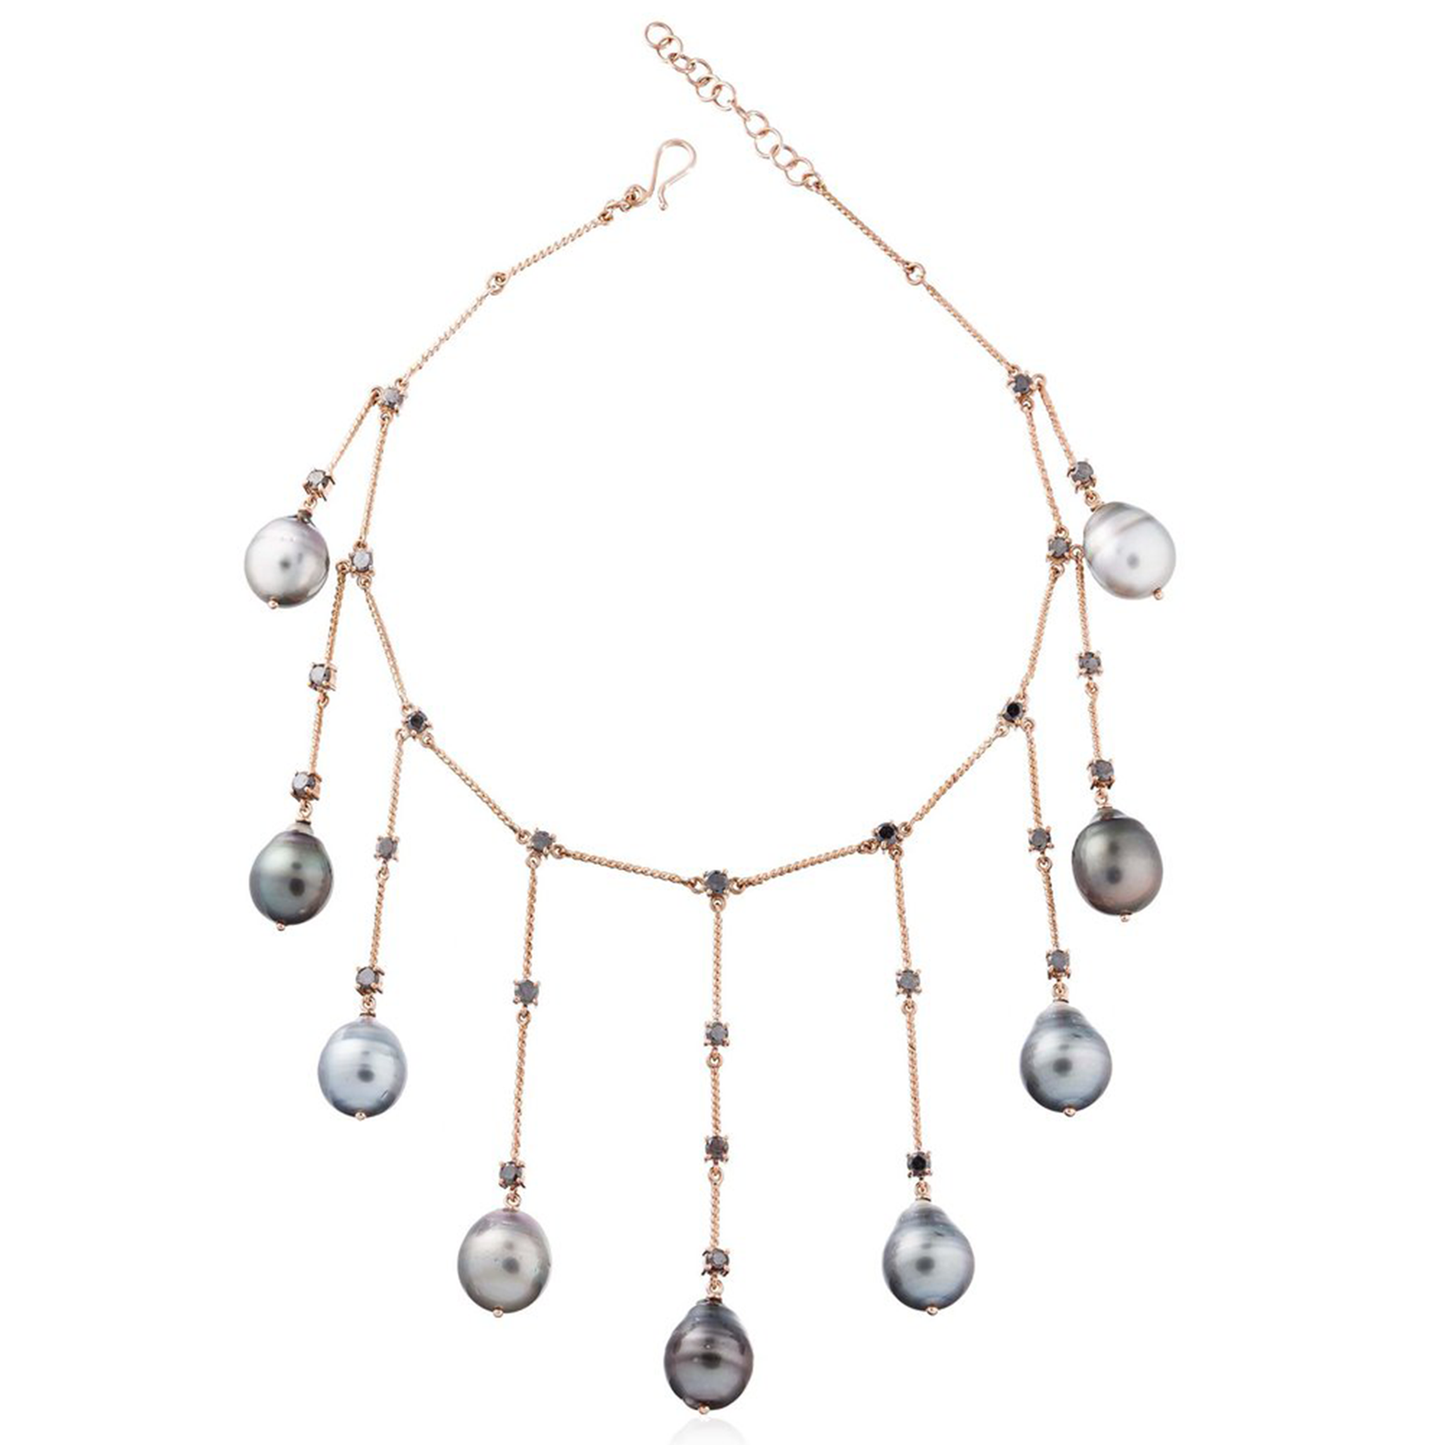 18k Rose Gold Necklace with South Sea Pearls and Diamonds